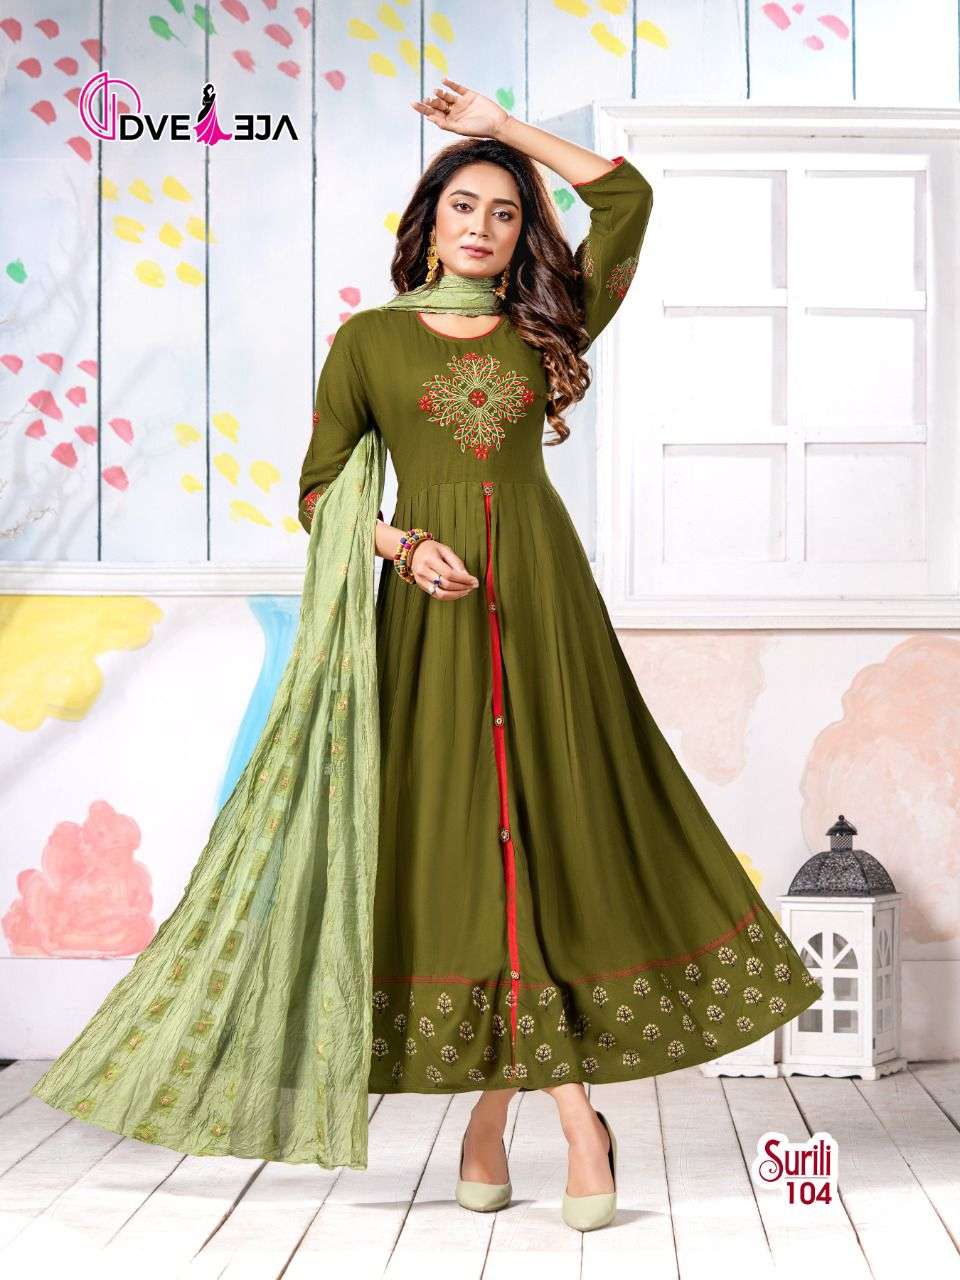 SURILI BY DVEEJA 101 TO 108 SERIES BEAUTIFUL STYLISH FANCY COLORFUL CASUAL WEAR & ETHNIC WEAR HEAVY RAYON EMBROIDERED GOWNS WITH DUPATTA AT WHOLESALE PRICE